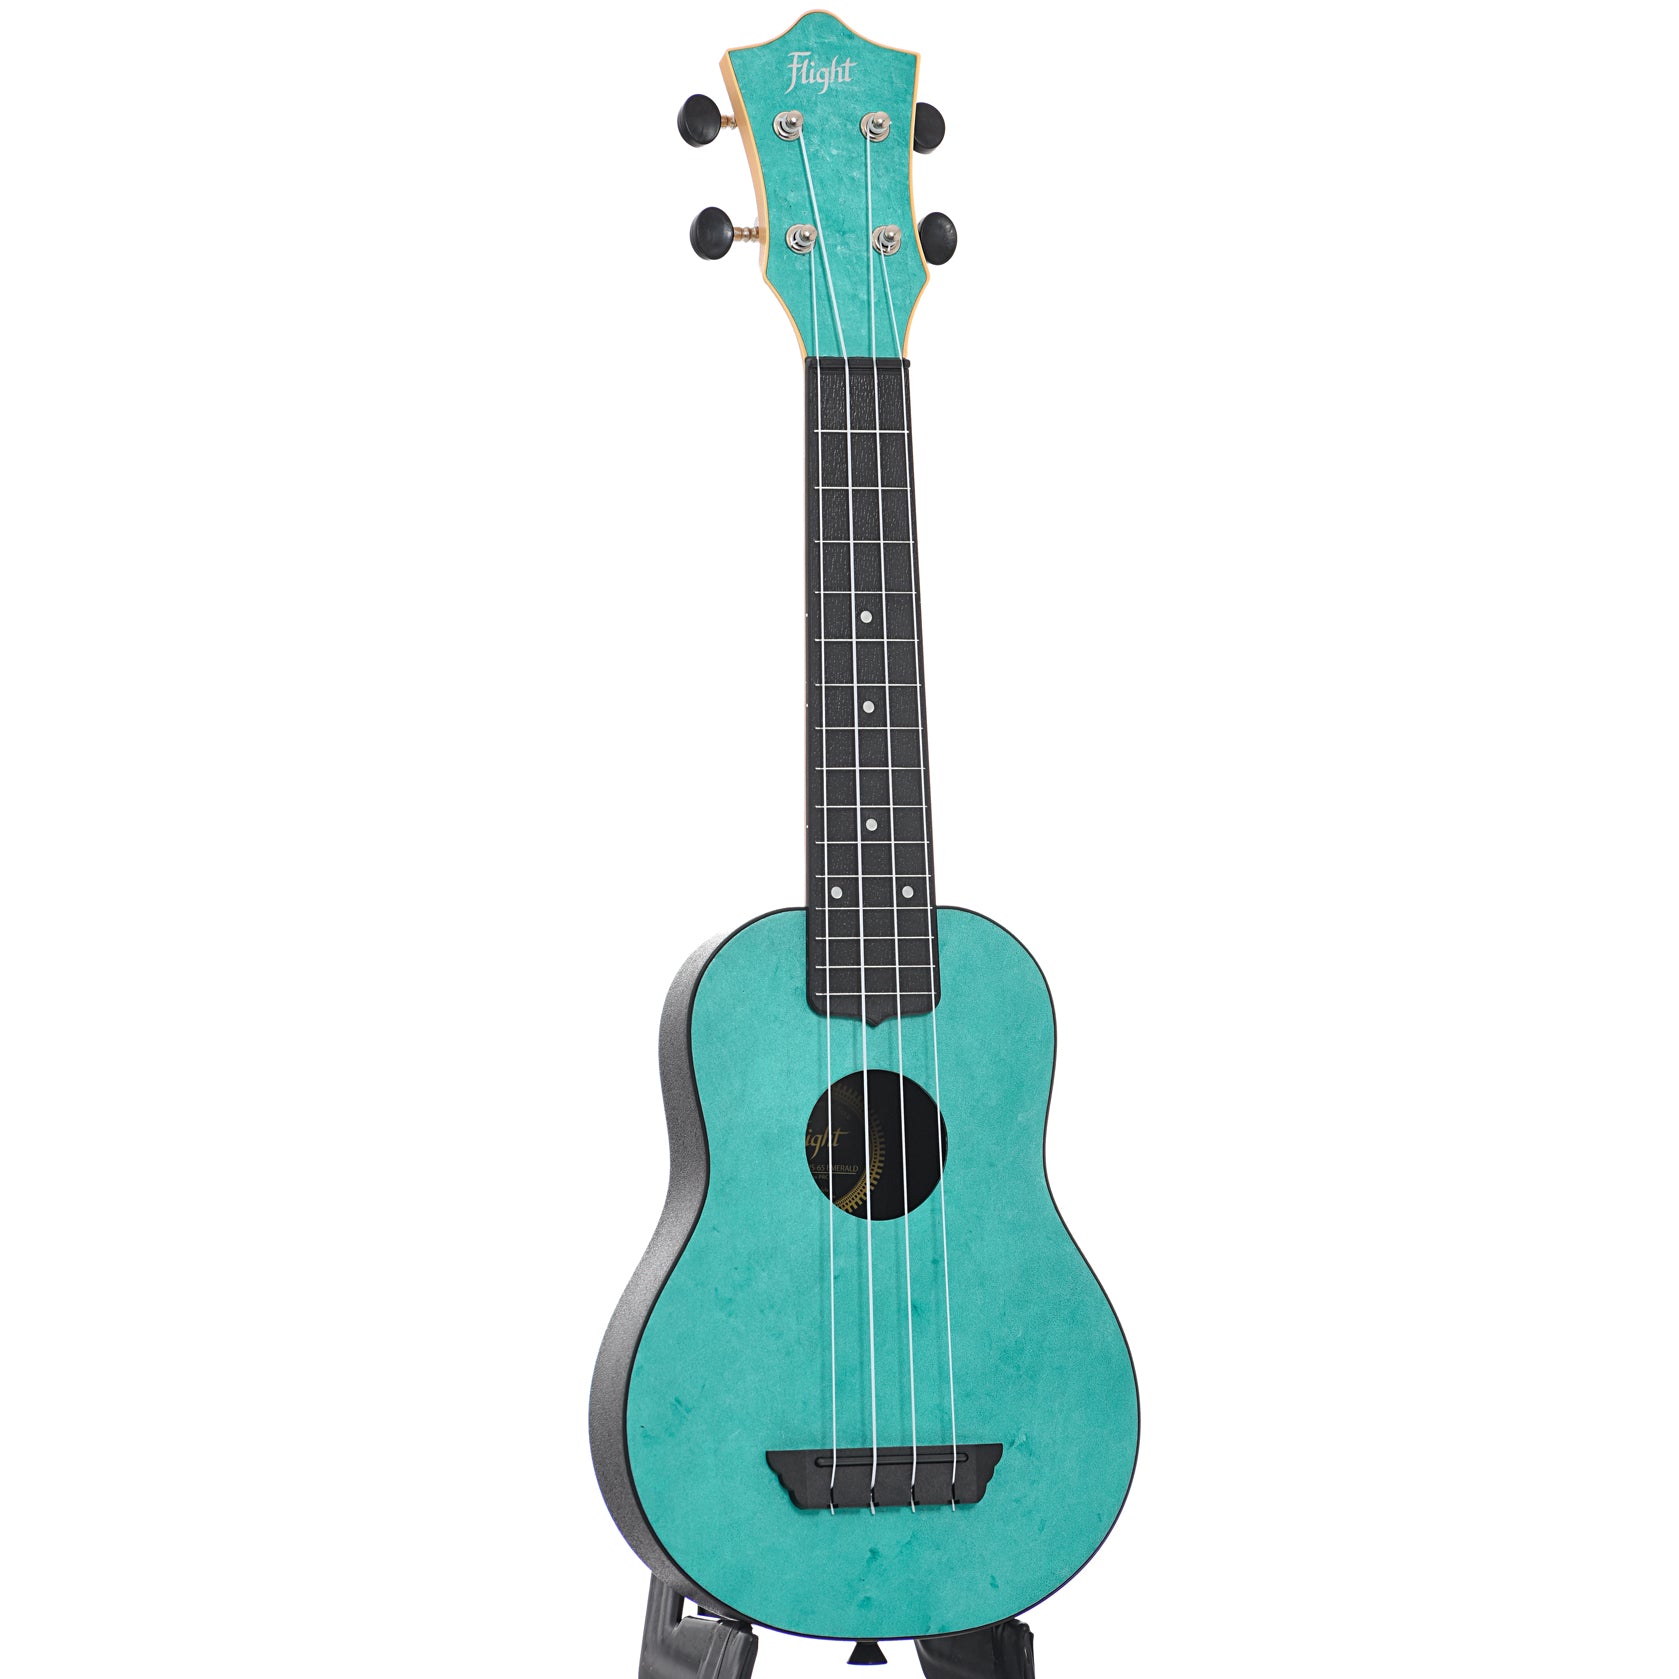 Full front and side of Flight Travel Series TUS65 Emerald Soprano